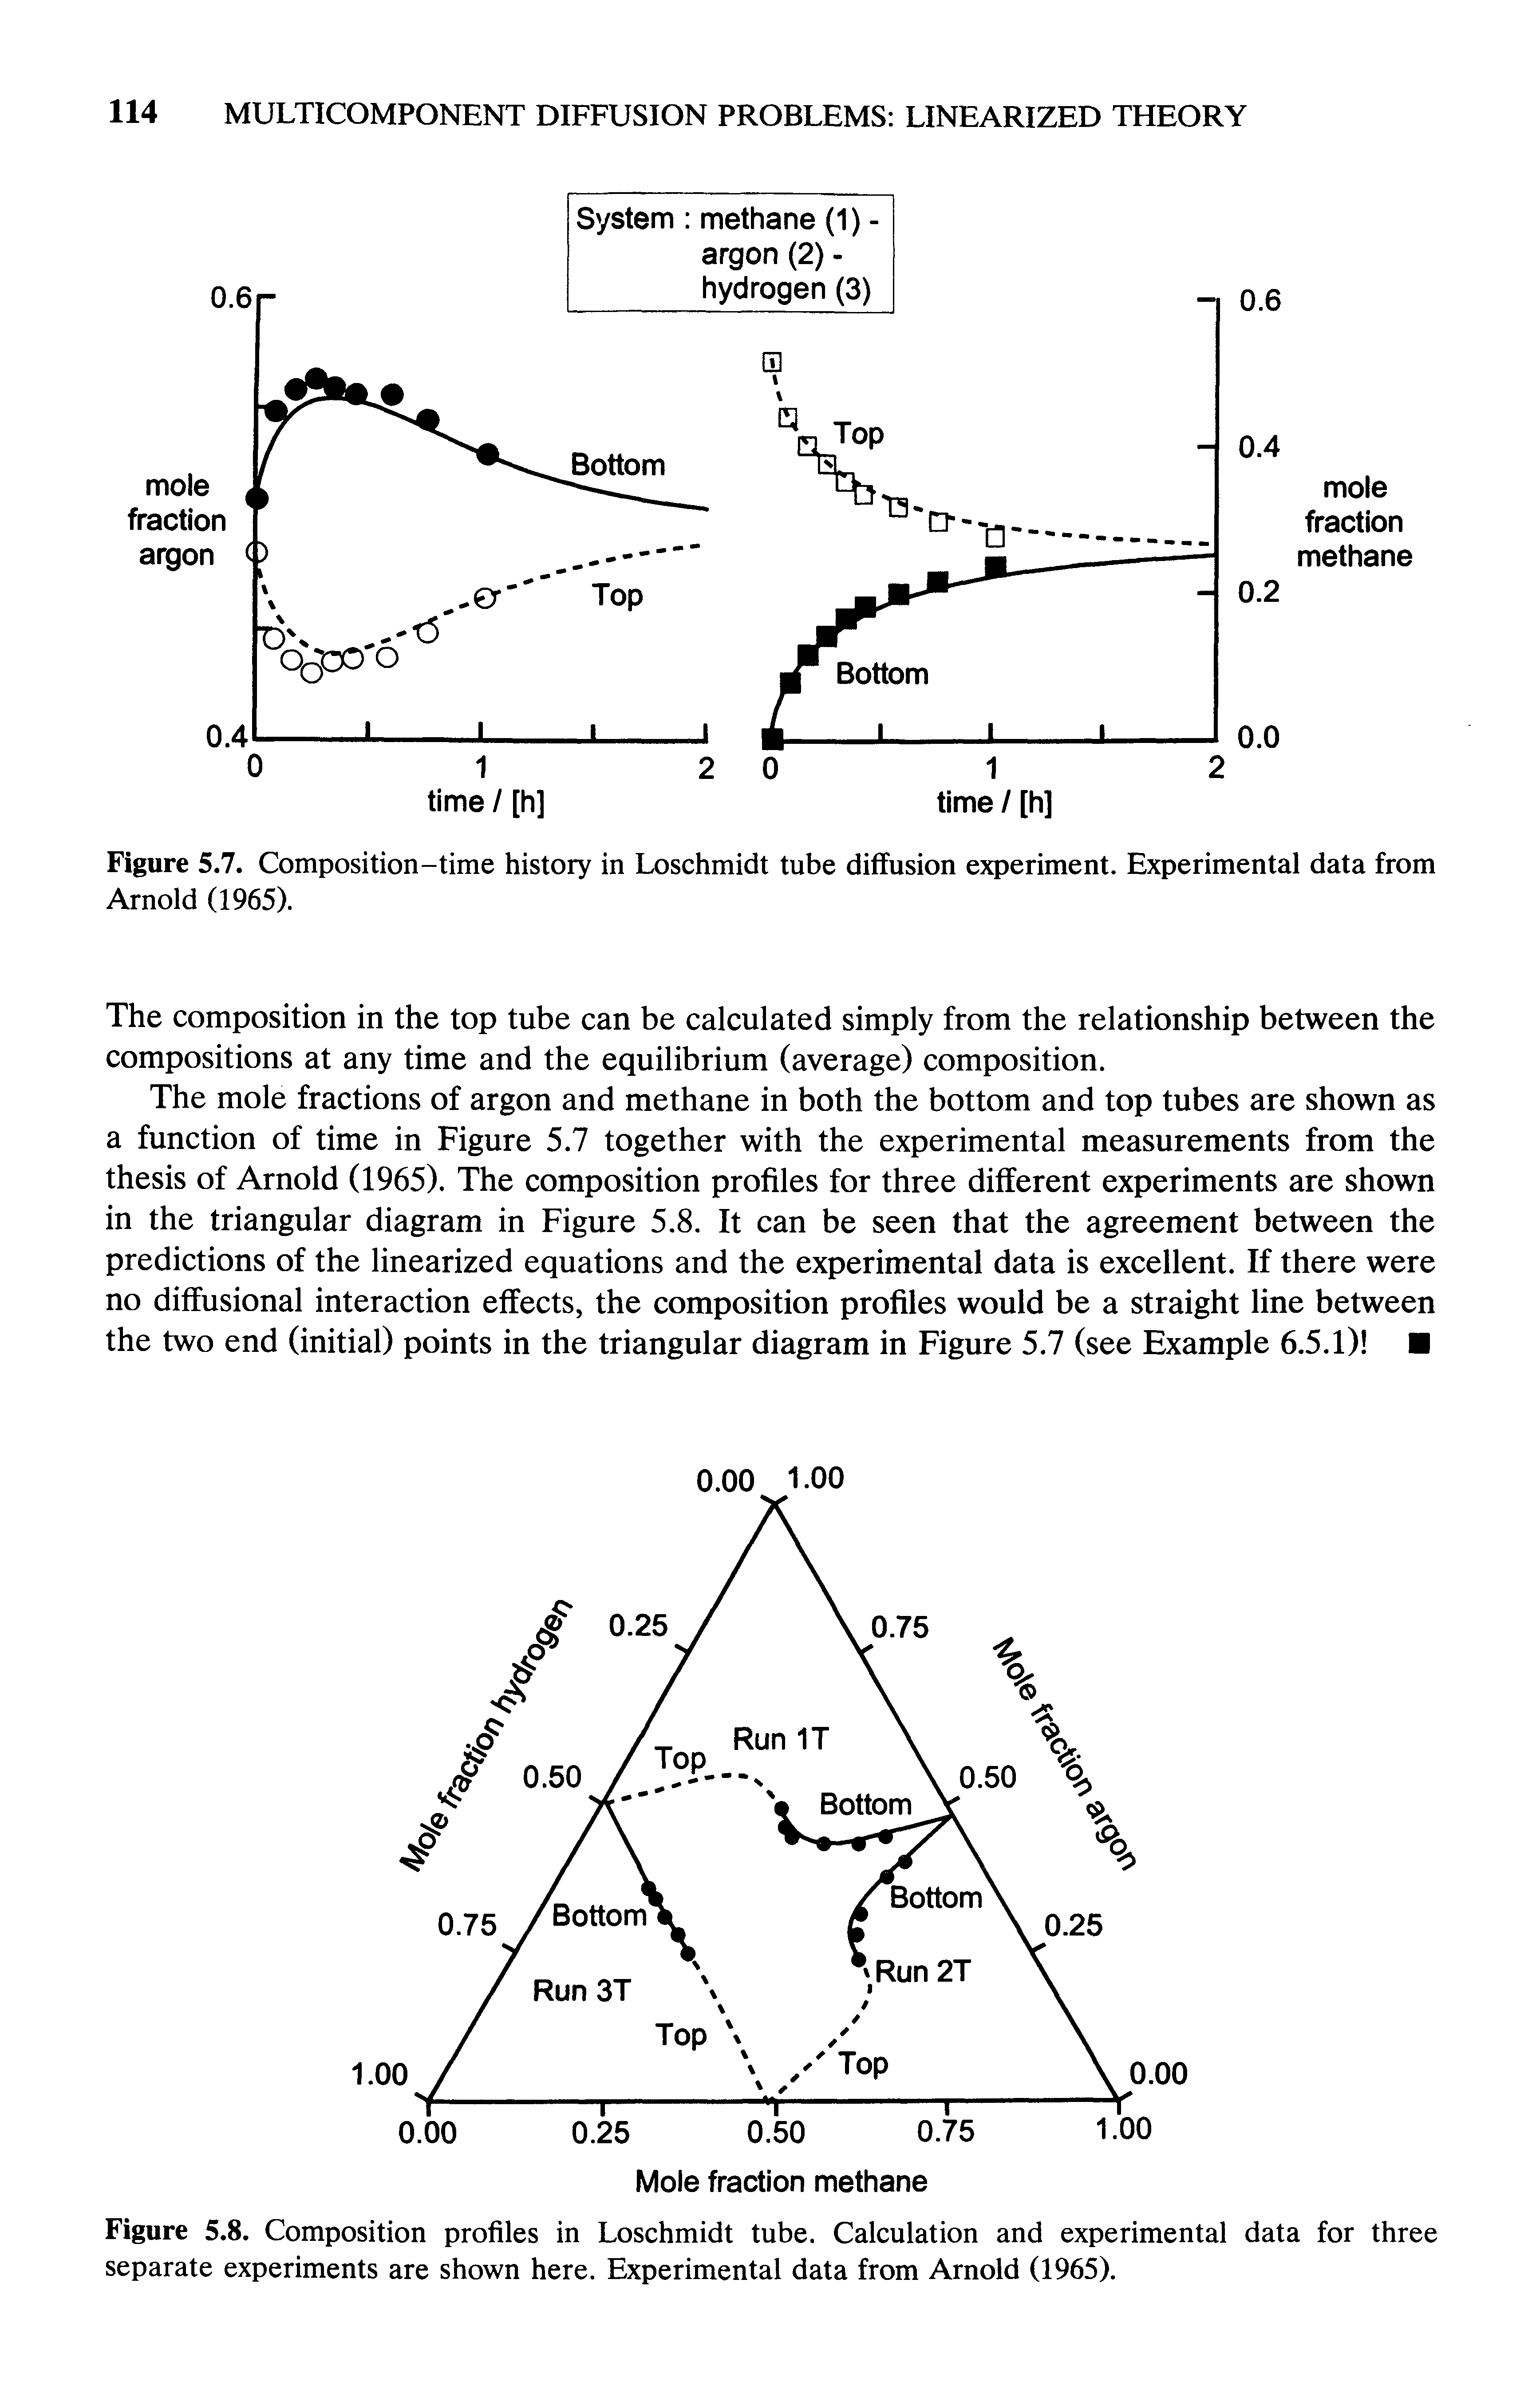 Figure 5.7. Composition-time history in Loschmidt tube diffusion experiment. Experimental data from Arnold (1965).